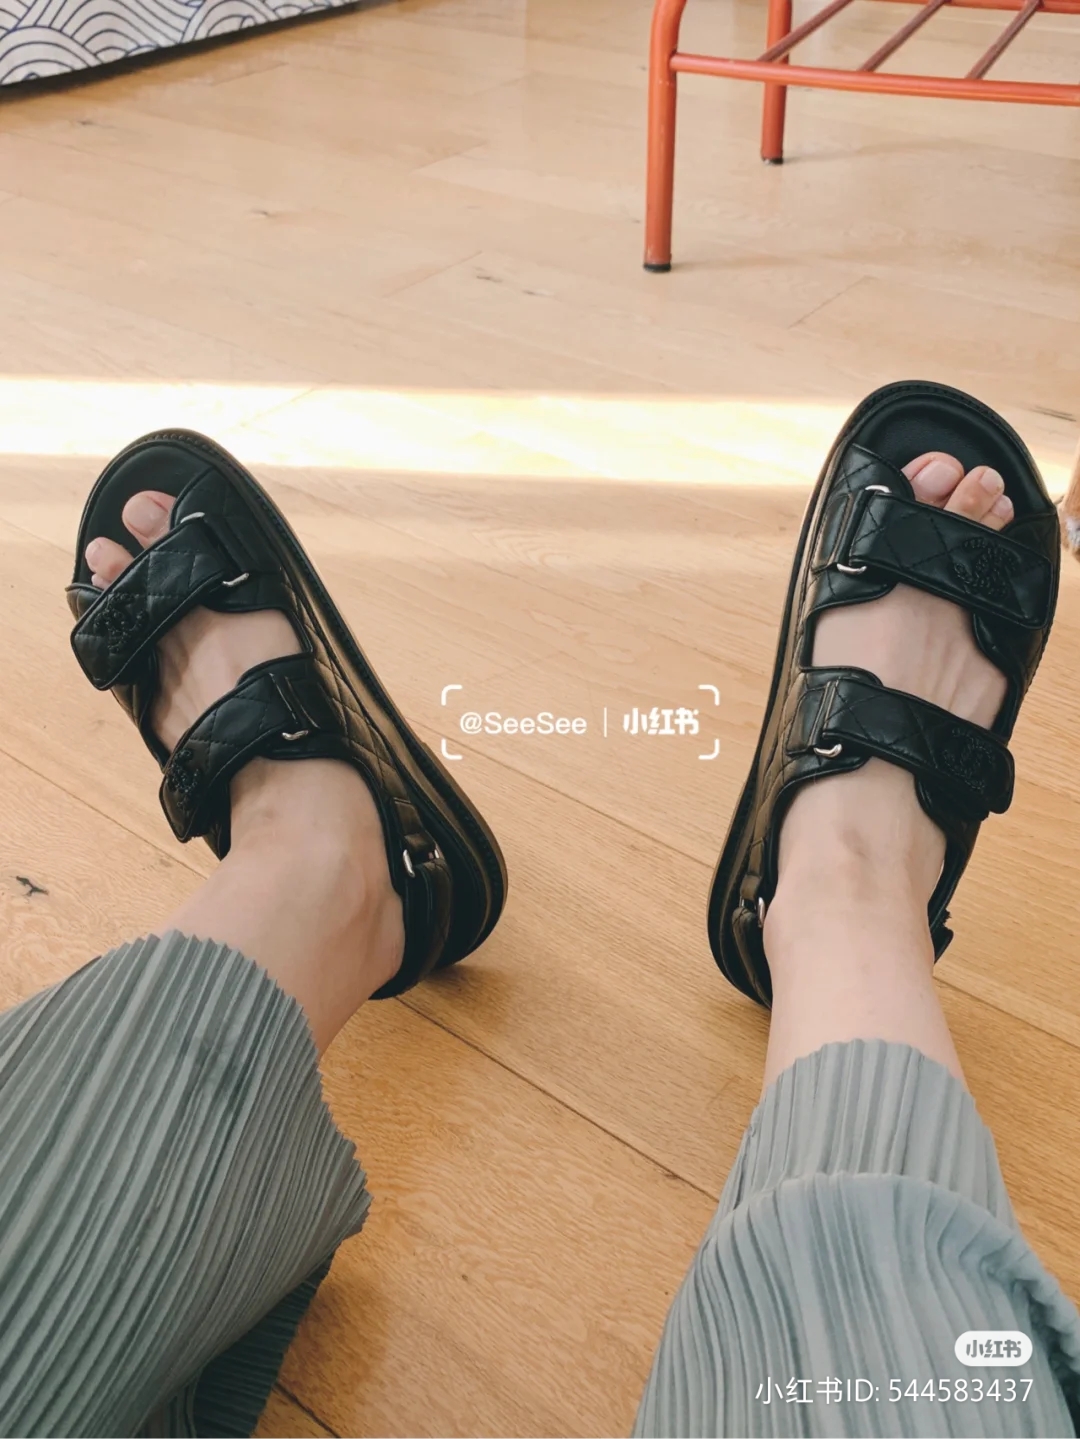 Dad sandal by Chanel